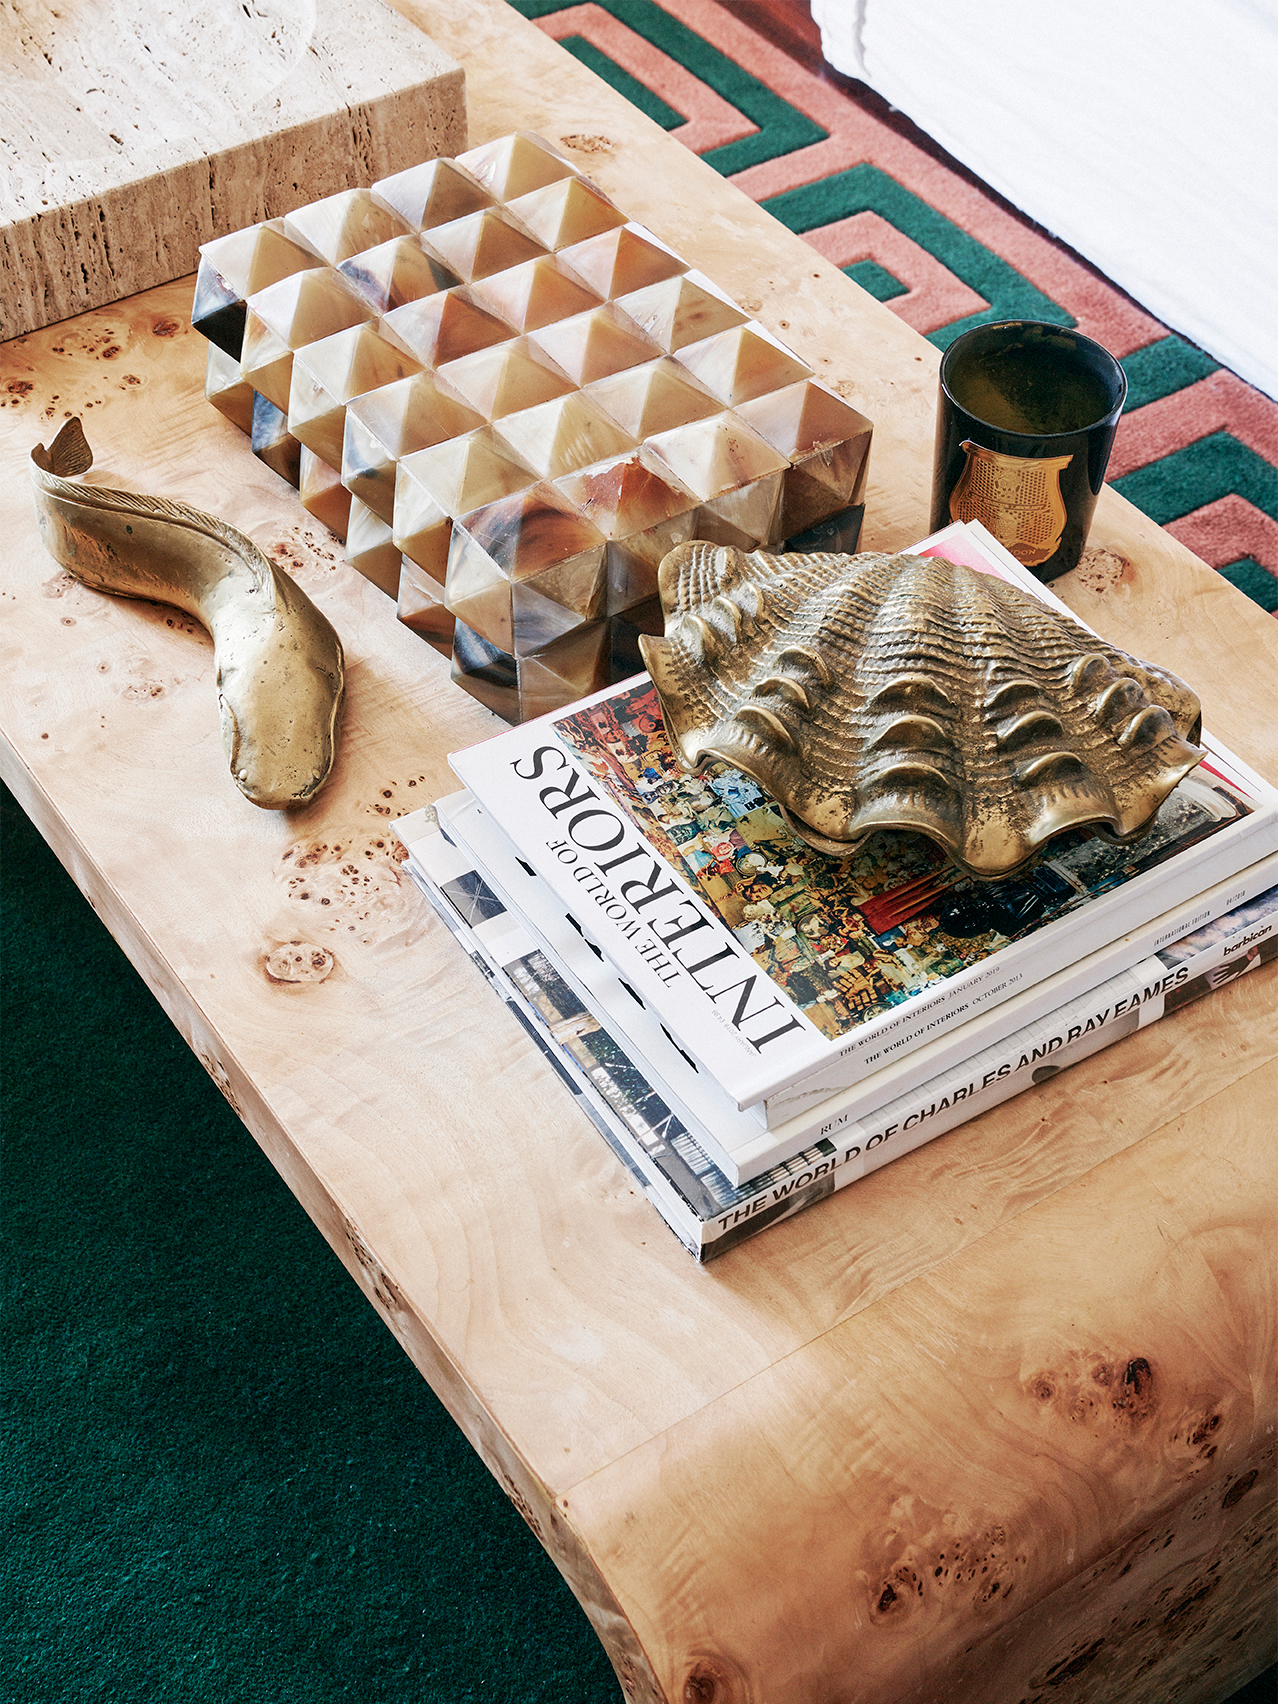 Wooden coffee table with knick-knacks.